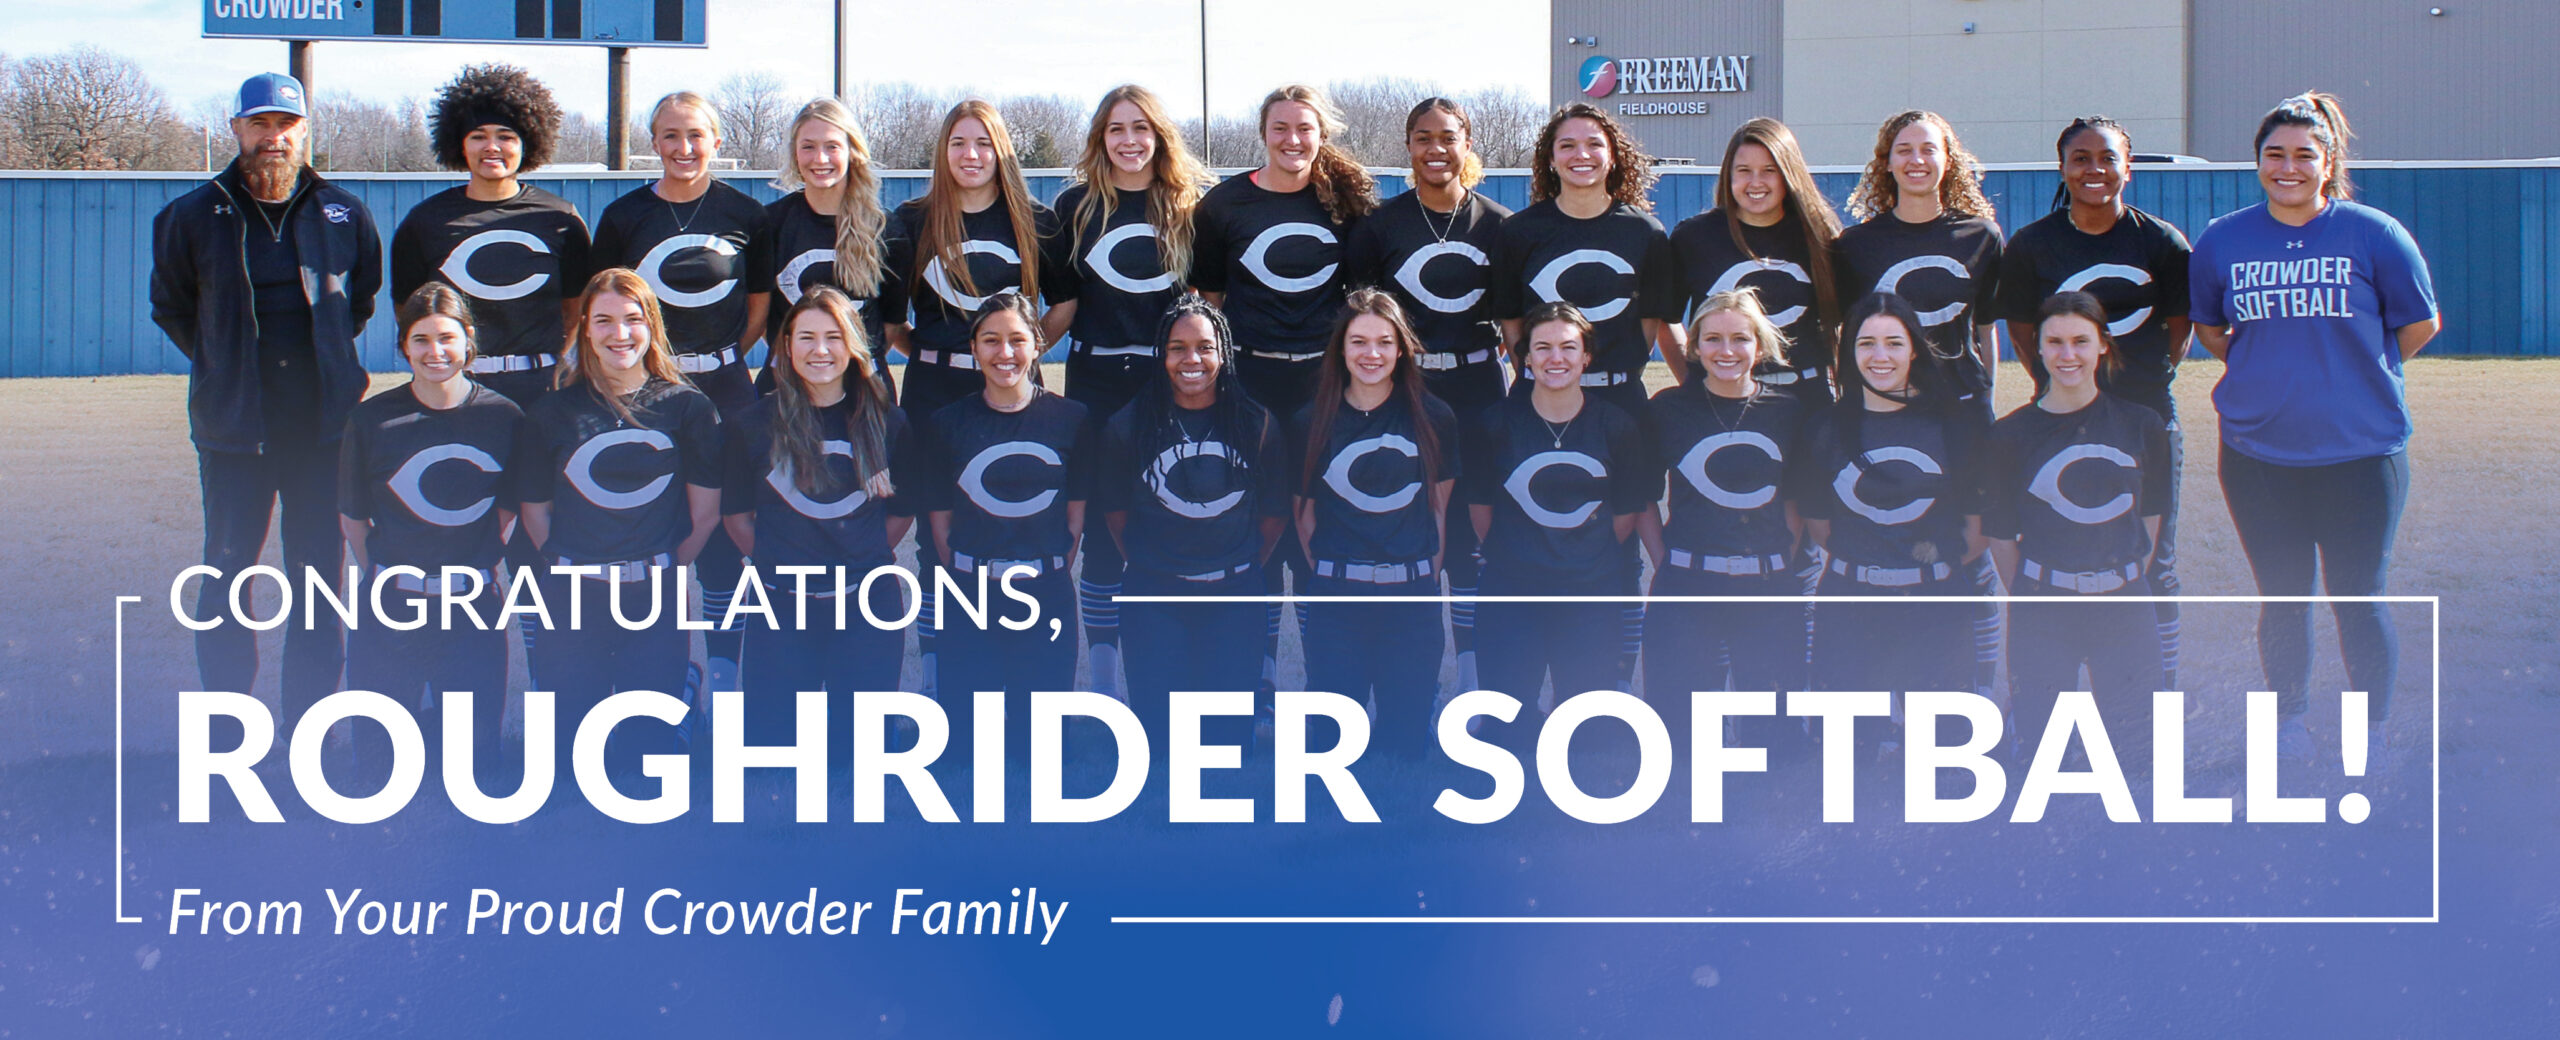 Congratulations, Roughrider Softball! From your proud Crowder Family